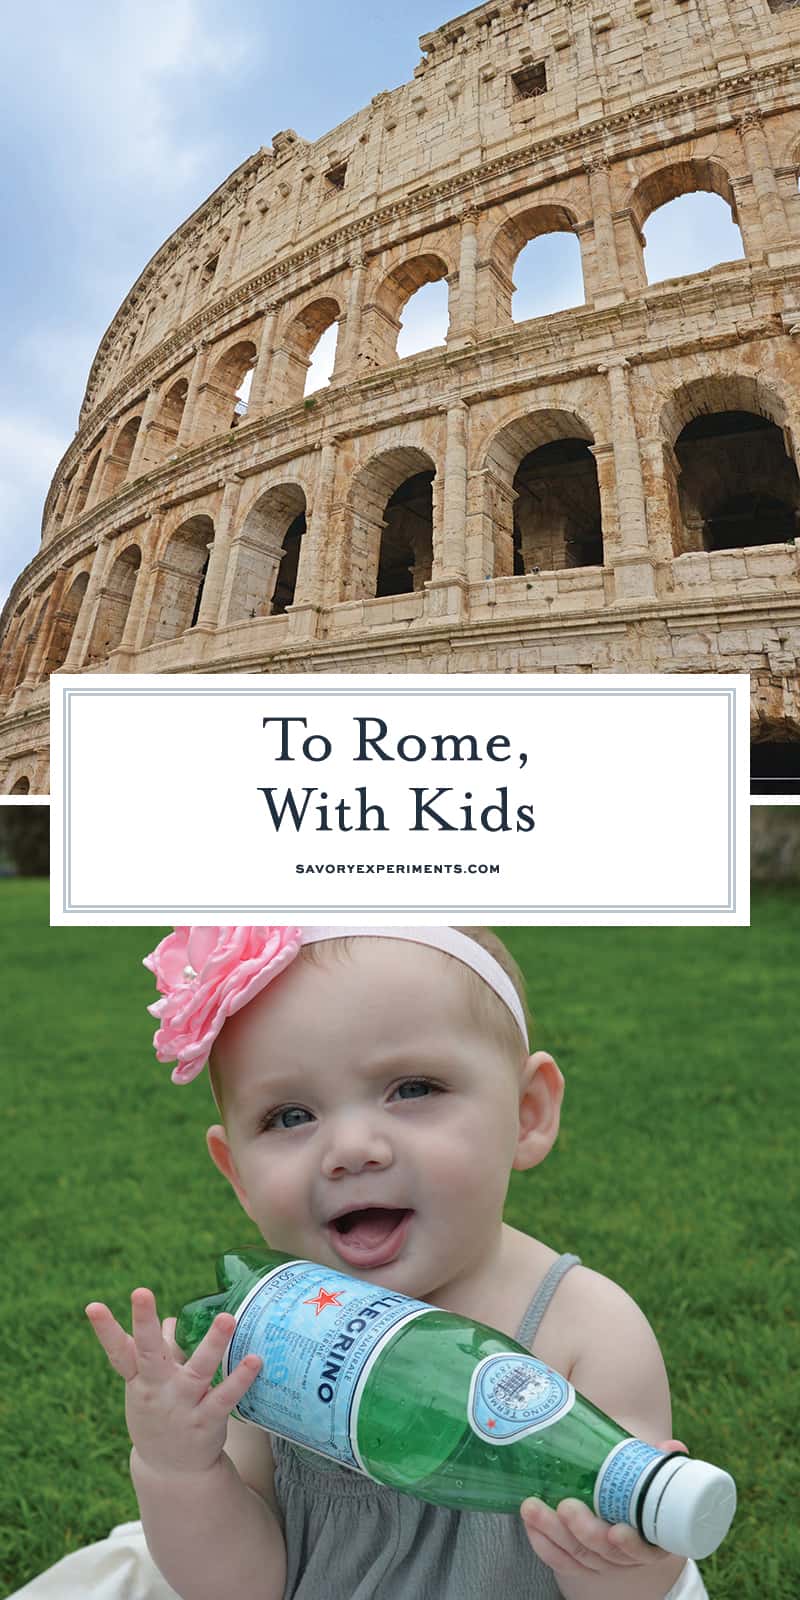 Tips for Traveling to Rome with kids. Must-have items and tips for a fun vacation! #vacationinrome #travelingwithkids www.savoryexperiments.com